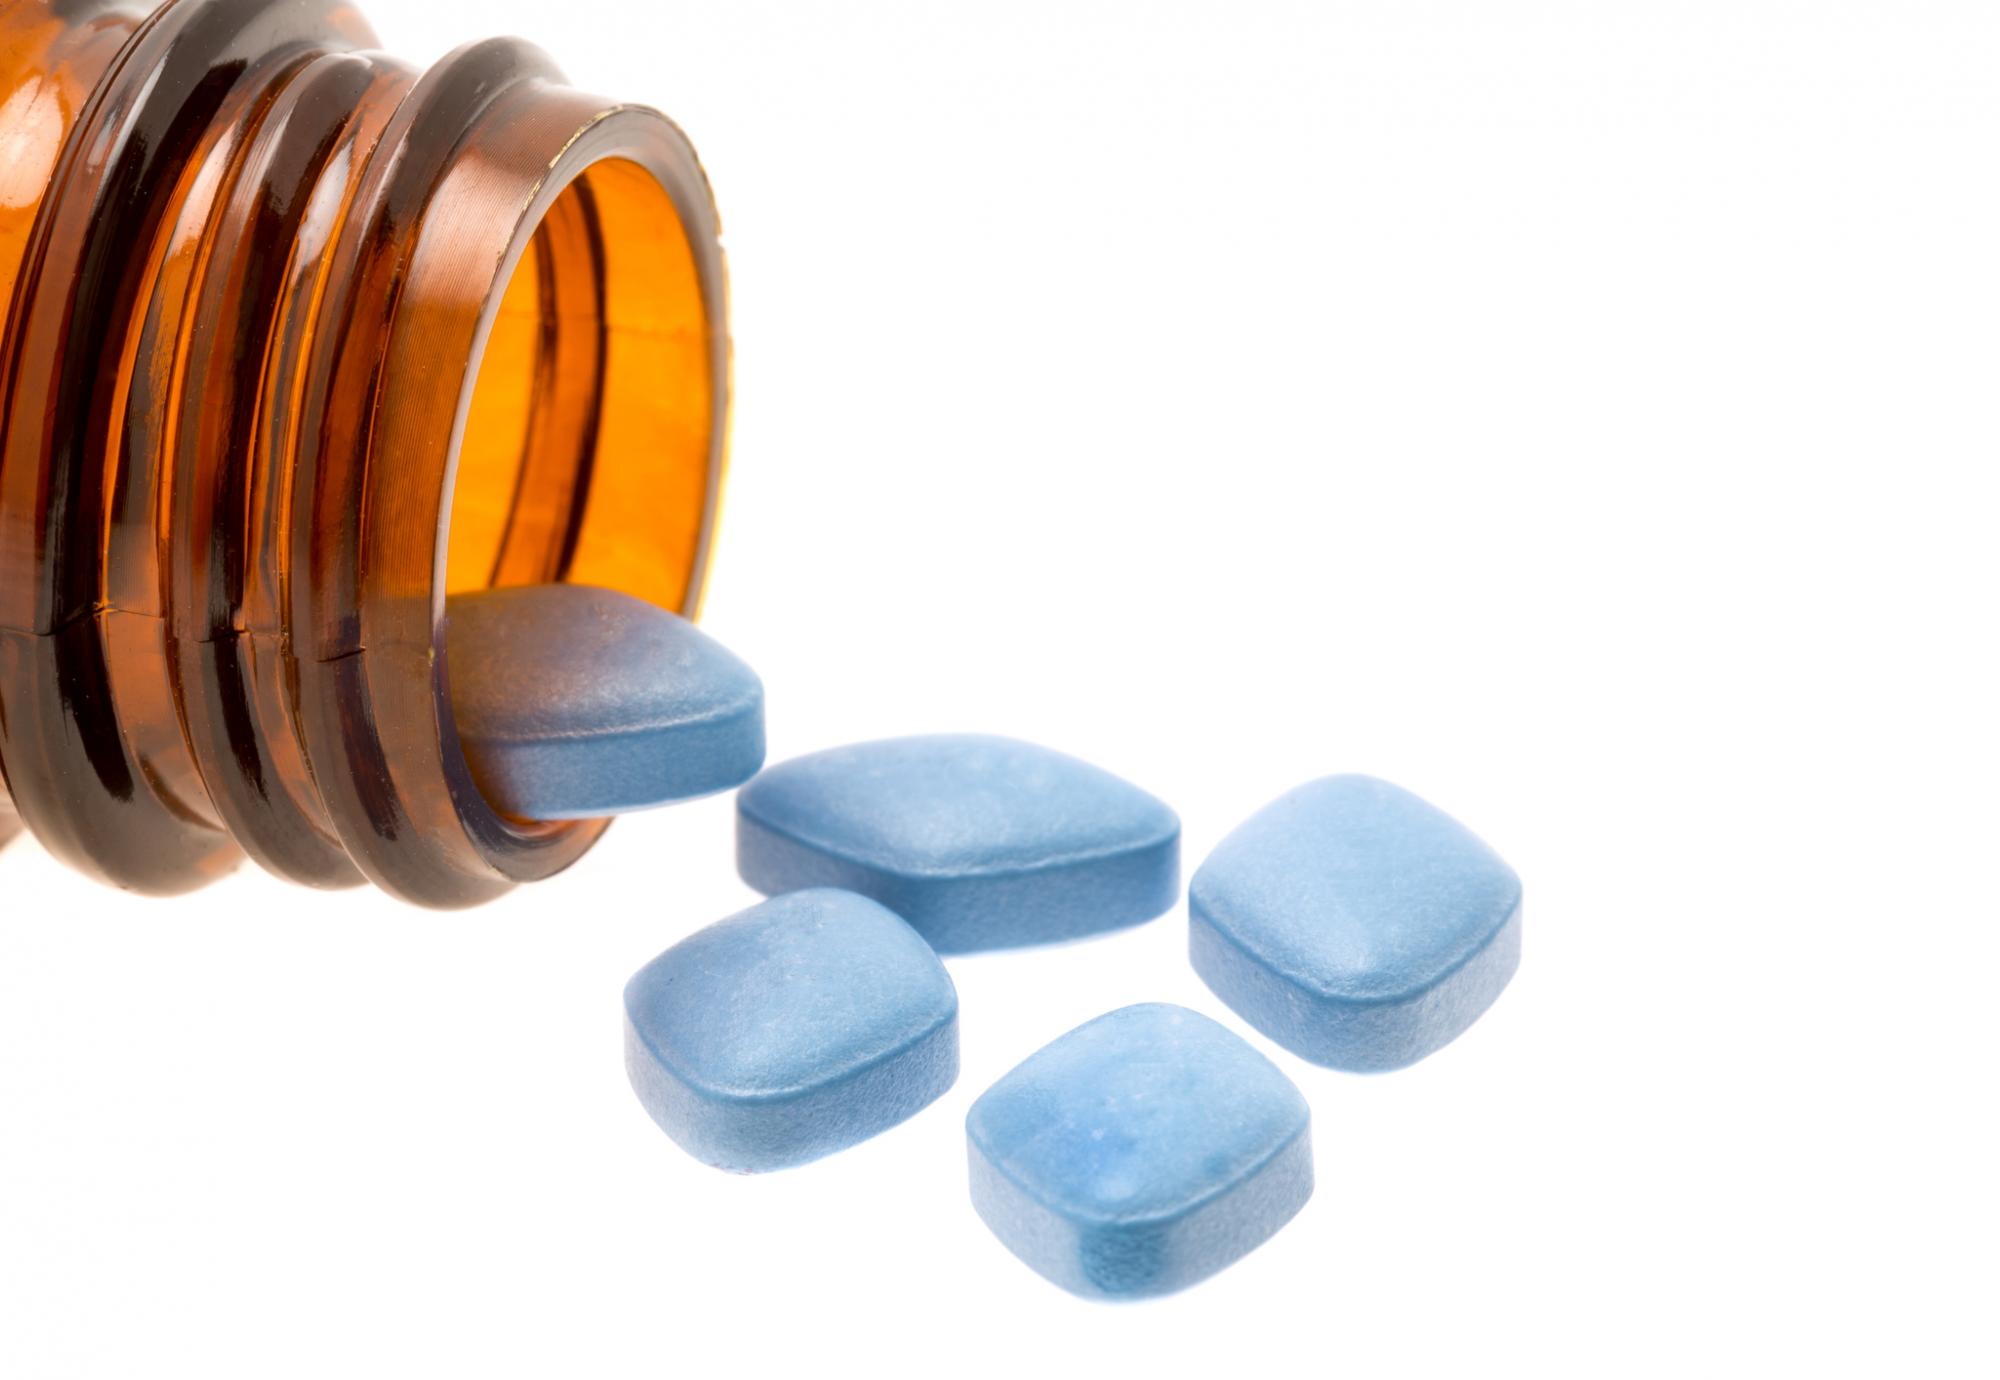 Why Viagra may be useful in treating lung diseases